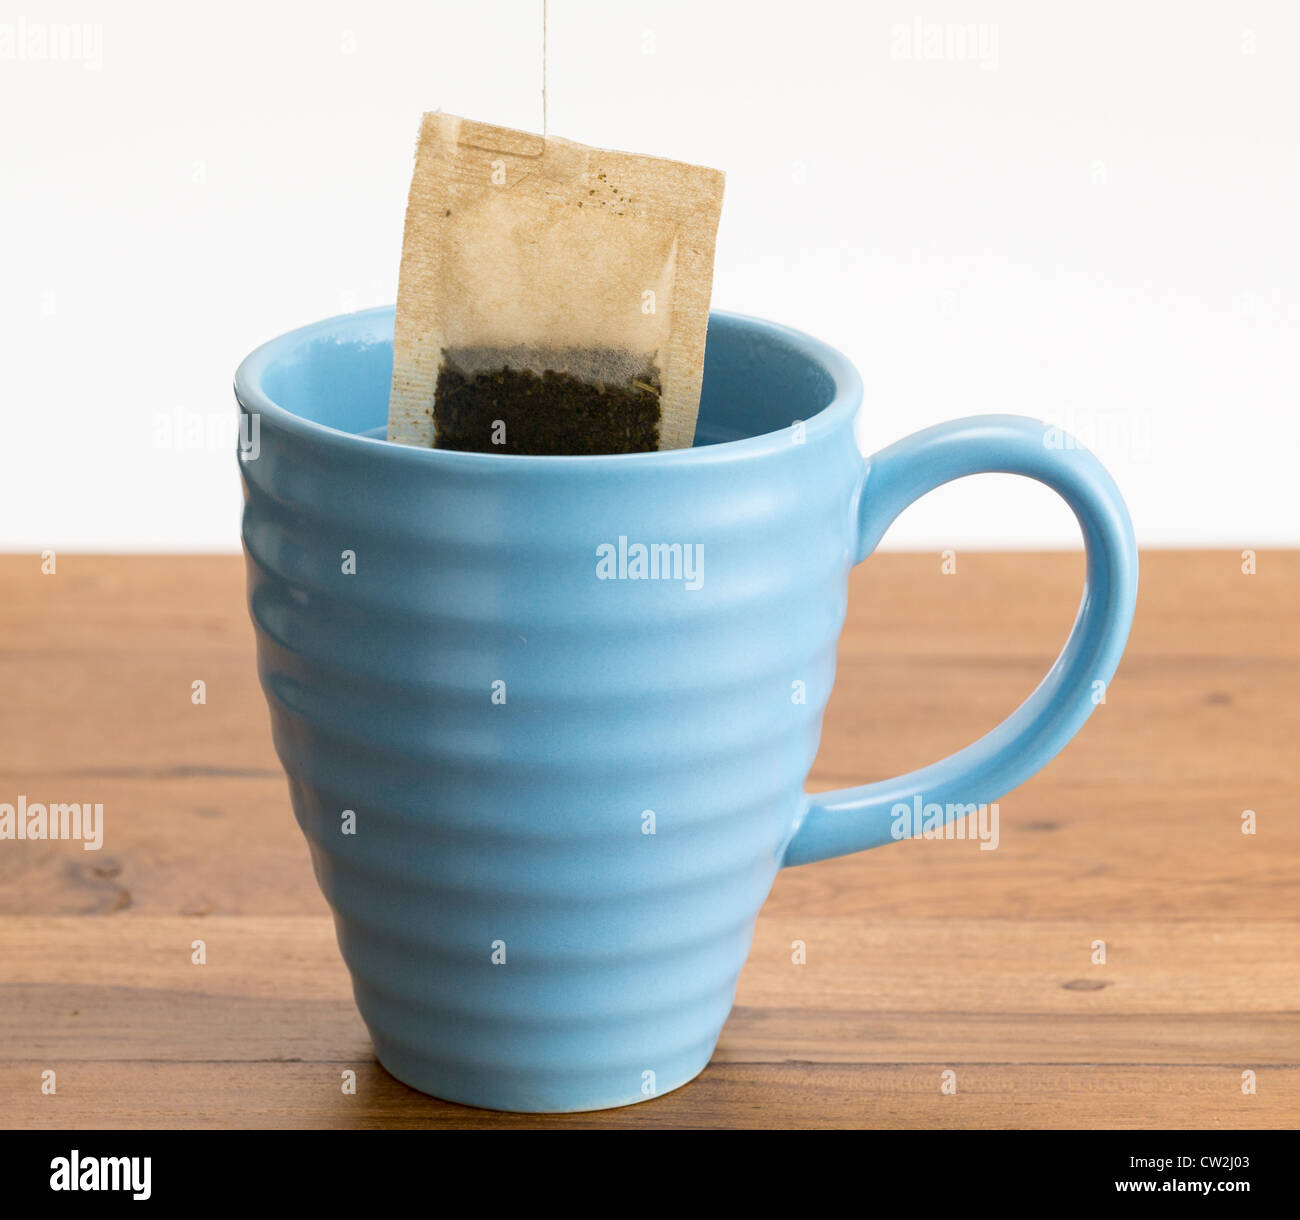 Organic green tea or herbal tea being lowered into a blue mug on wooden table Stock Photo